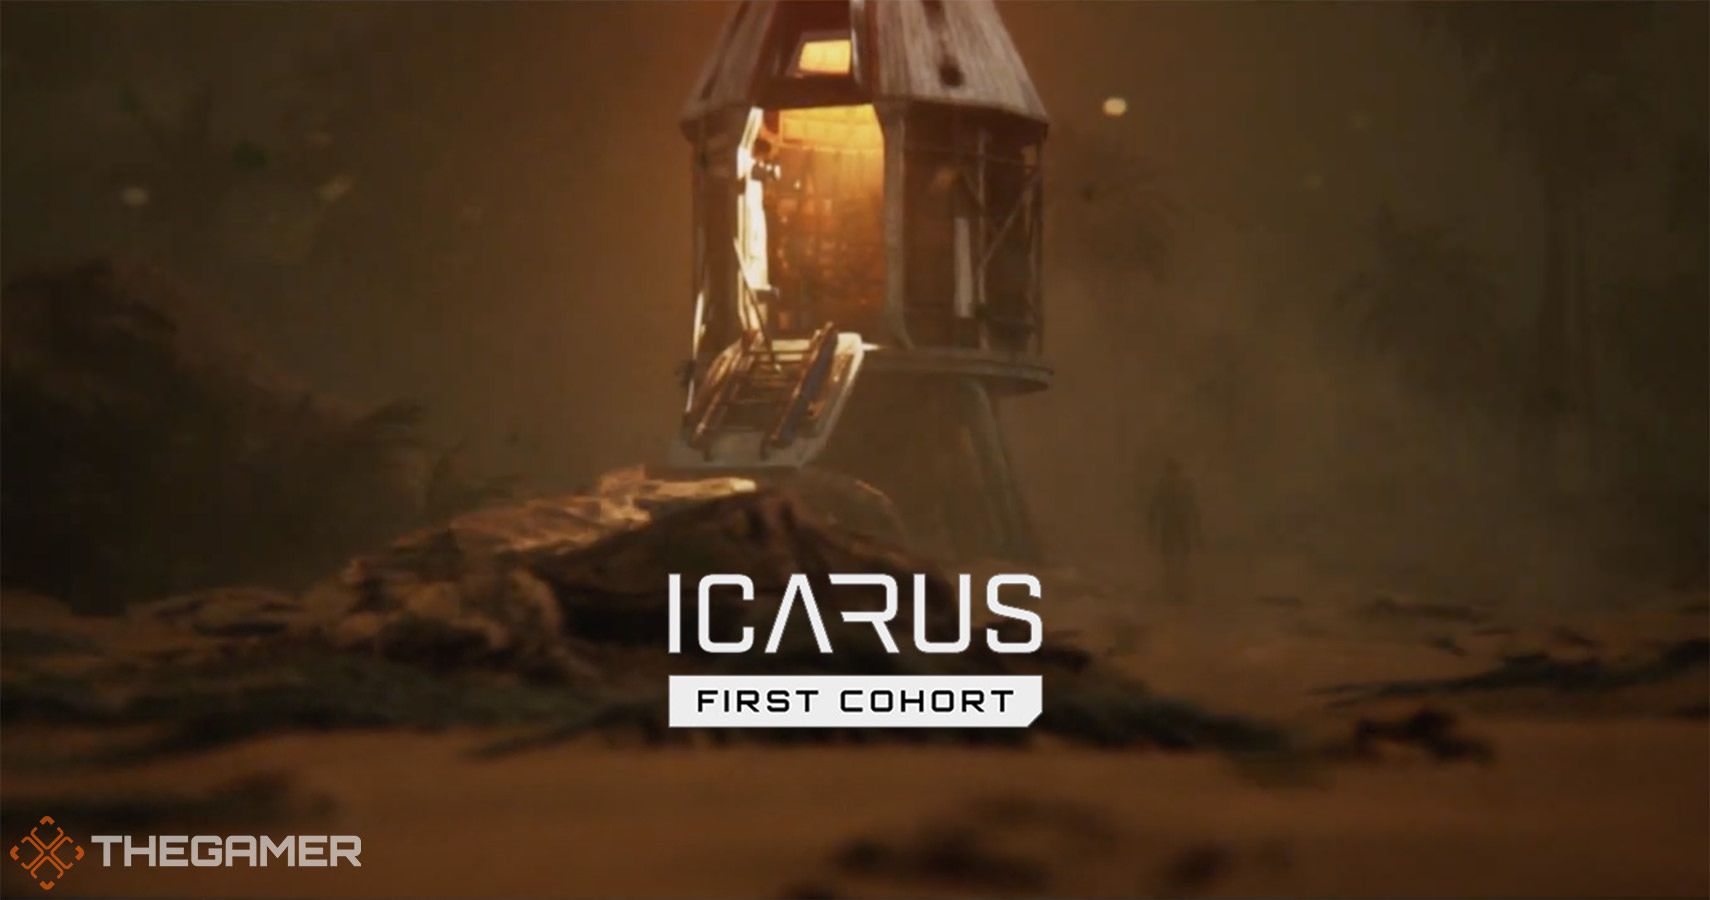 DayZ creator Dean Hall's new game Icarus launches Friday